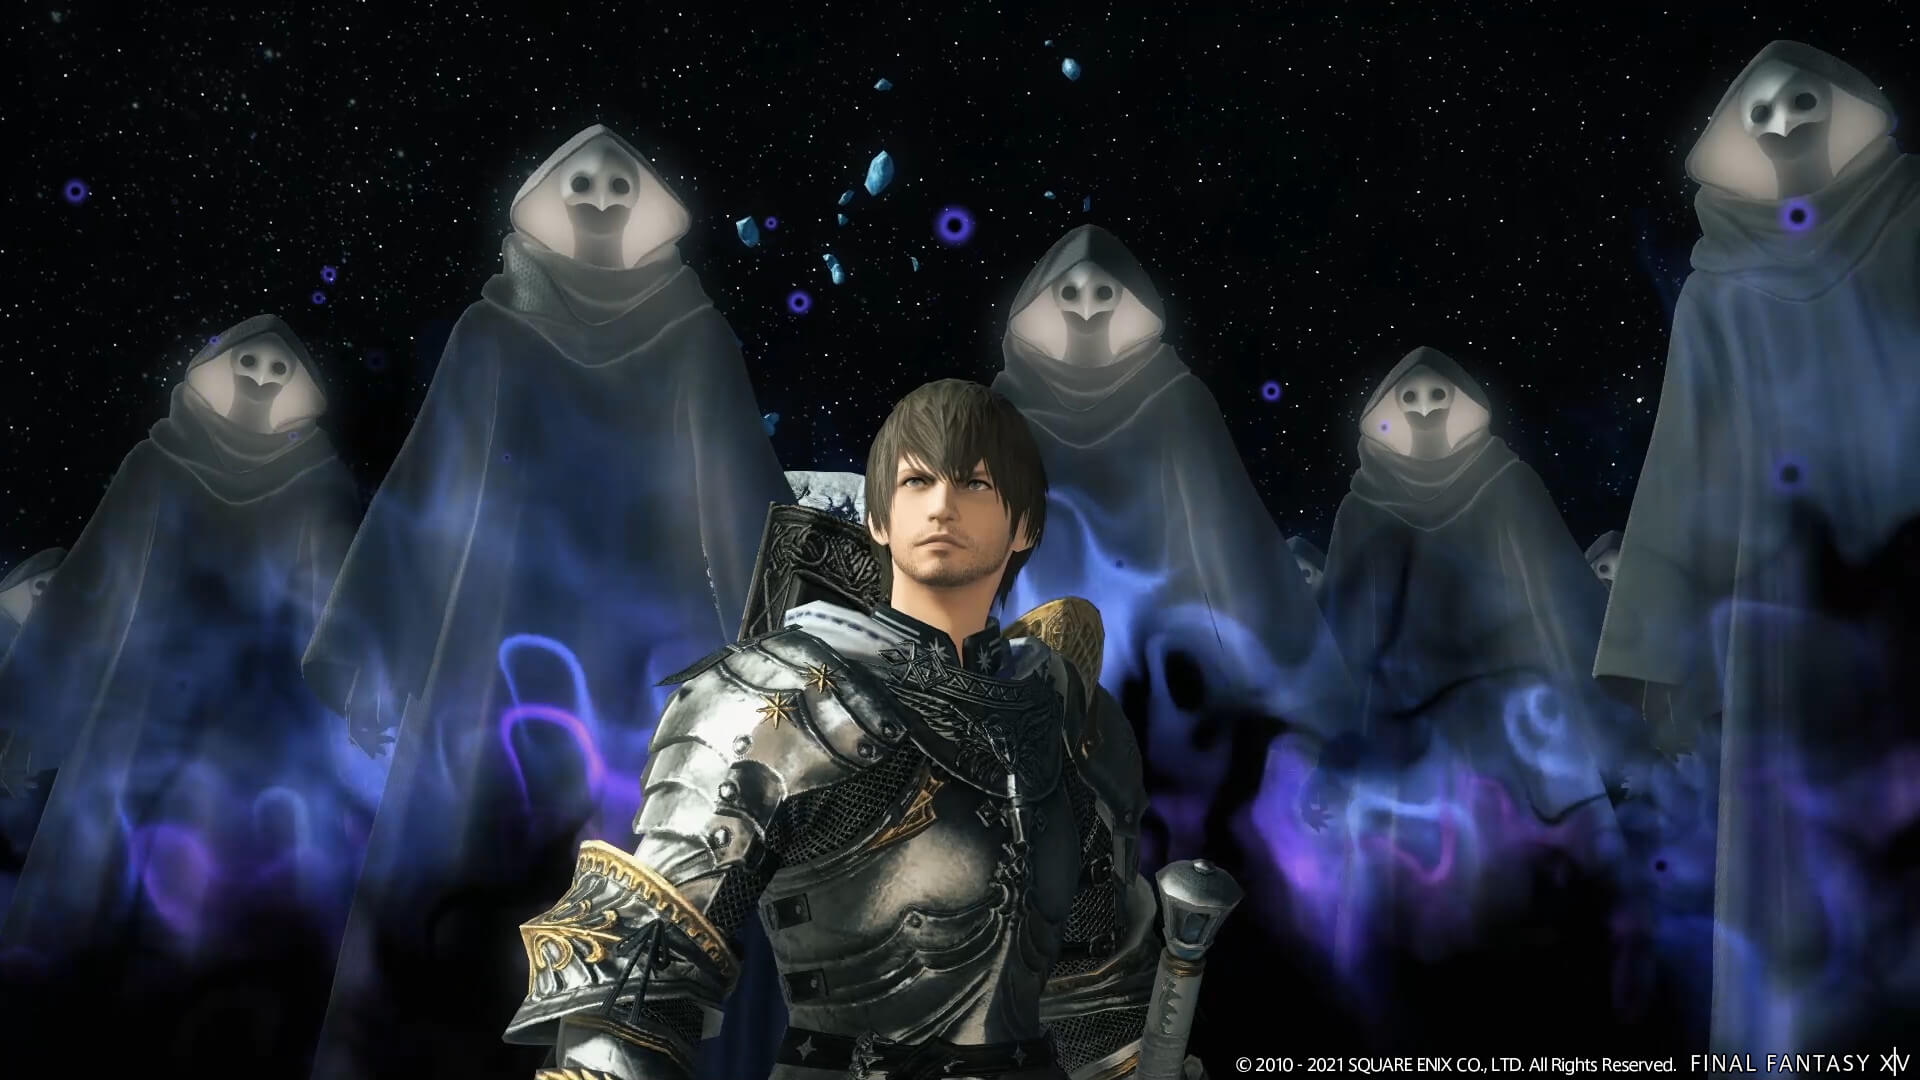 The player surrounded by Ascians in Final Fantasy XIV Endwalker